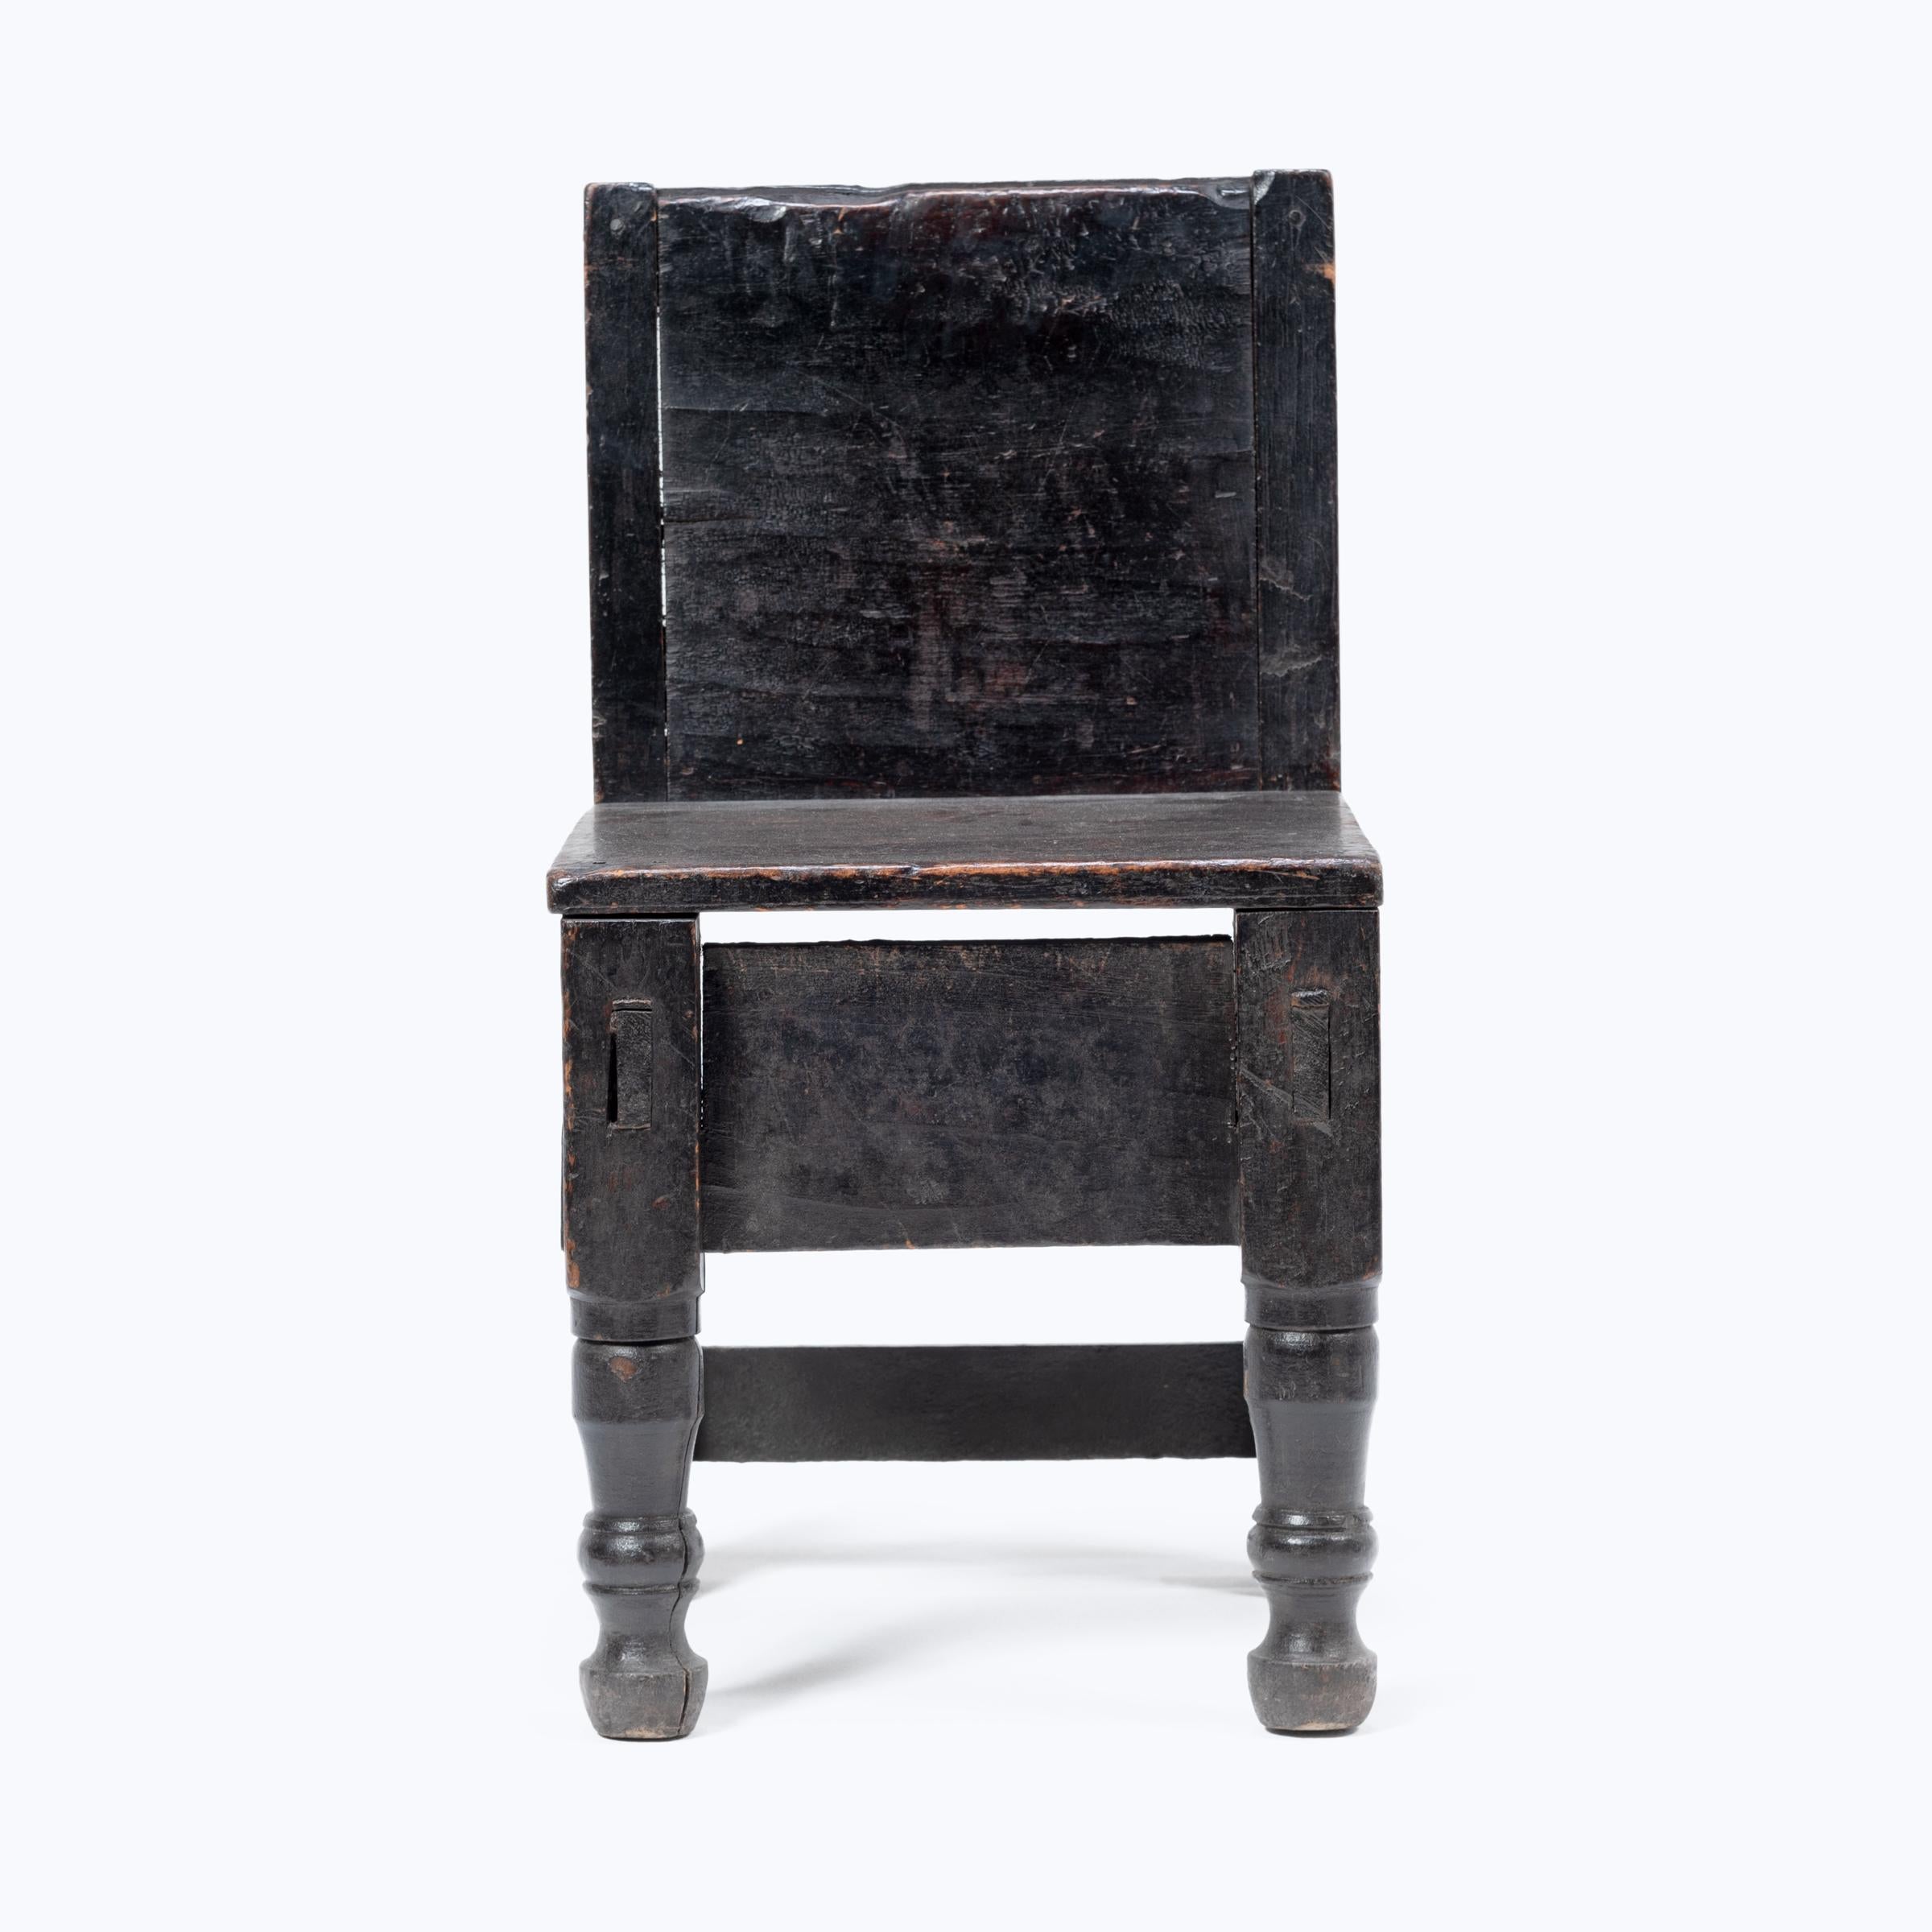 Crafted in the early 20th century, this petite Guatemalan children's chair charms with its playful asymmetry and blend of motifs. Influenced by Spanish Colonial furniture design, the painted chair has an angular back and square seat resting on two